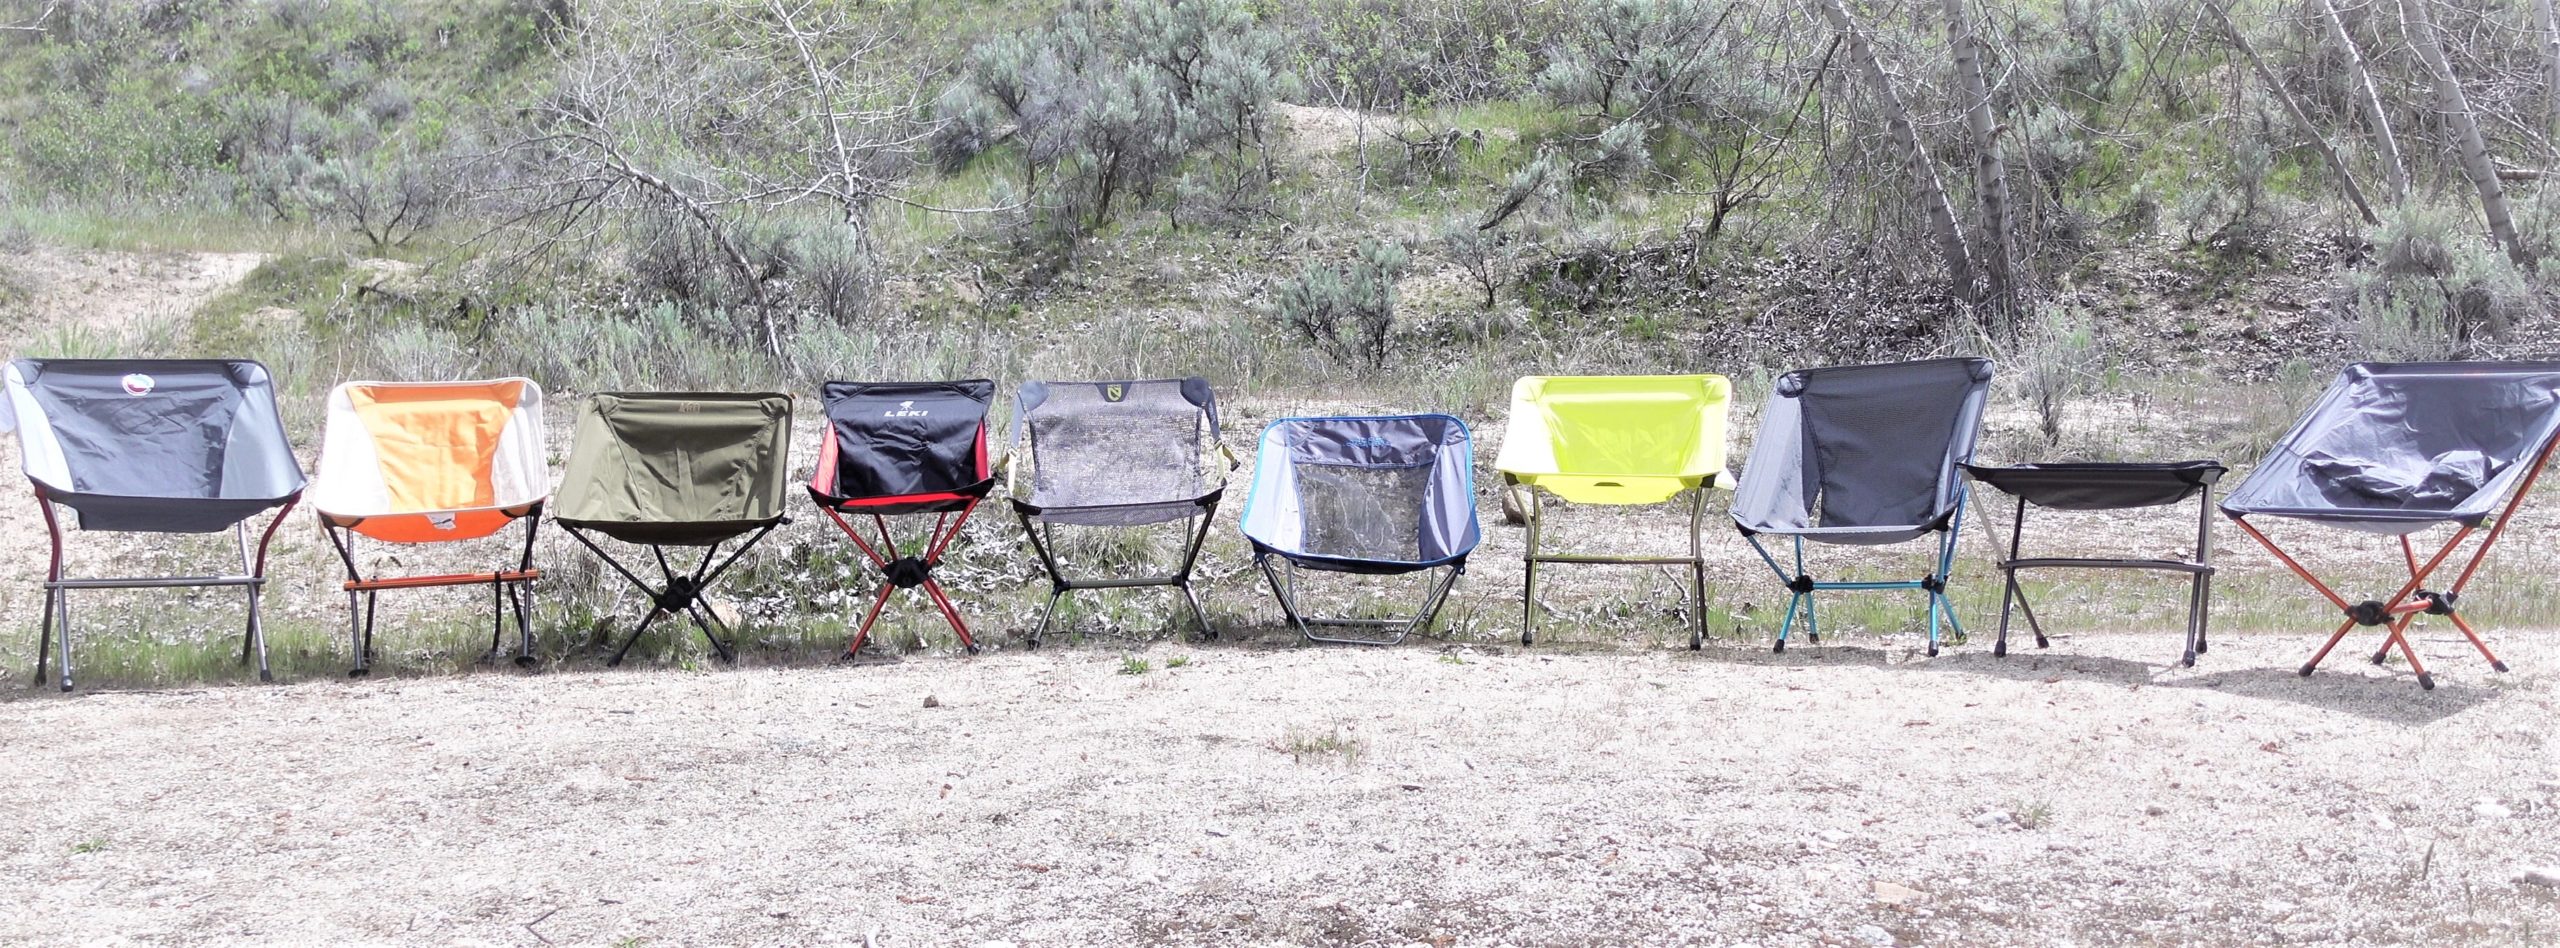 10 Best Ultralight Backpacking Chairs | 1-2 lb Options - Backwoods